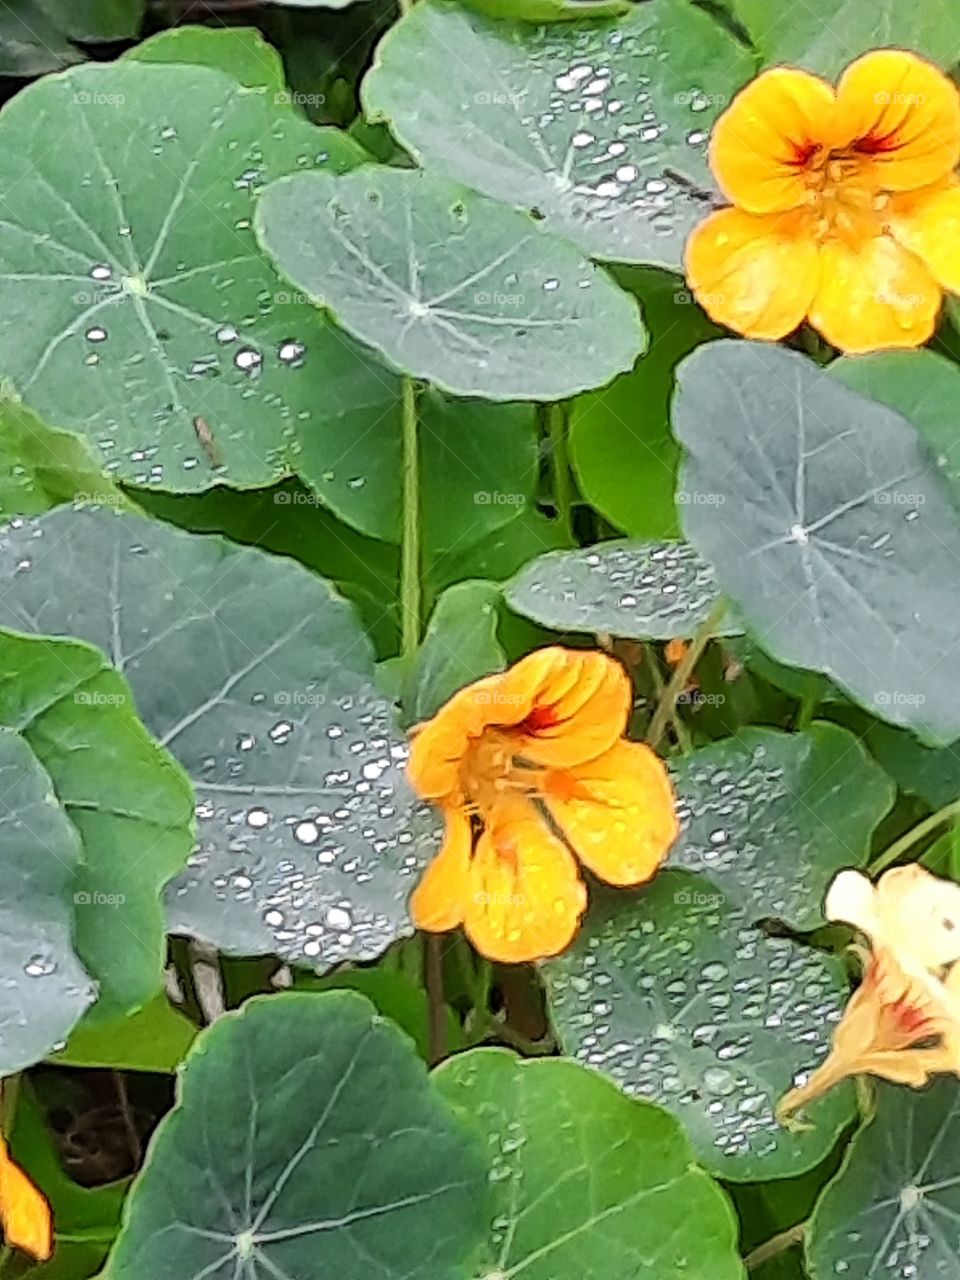 nasturtium flowers and leaves with dew drps